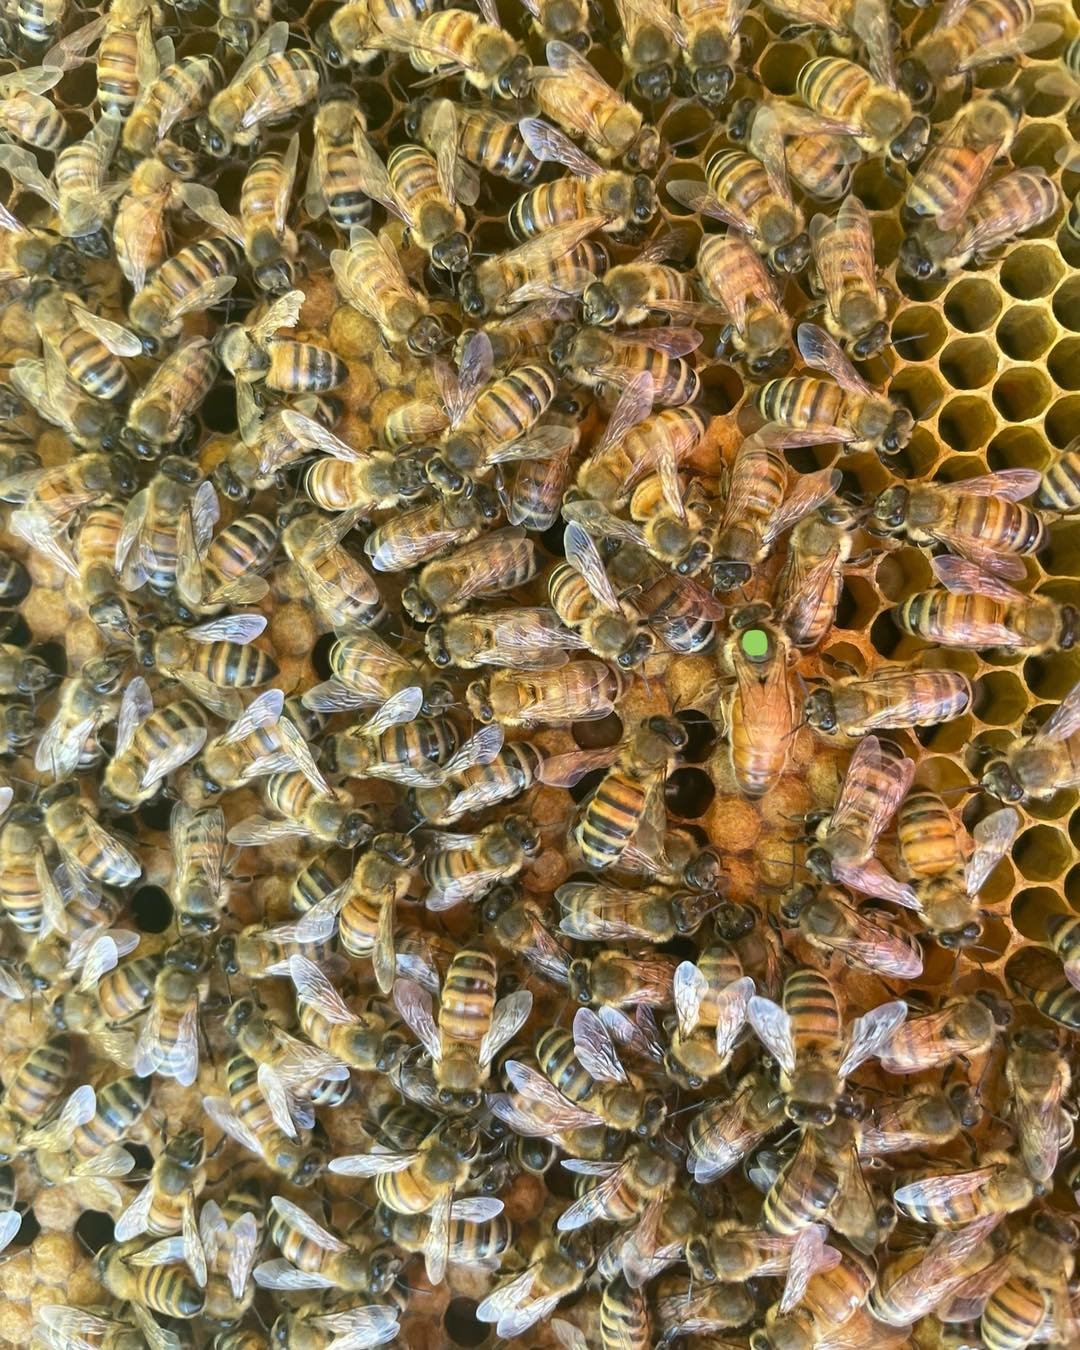 We&rsquo;ve been getting a lot of calls asking if we have queens available. The answer is yes! You can reserve via our website. Pickup is at our farm on Saturday from 9-10am. Use this link to order: https://www.elznerfarms.com/shoponline/2024-queen